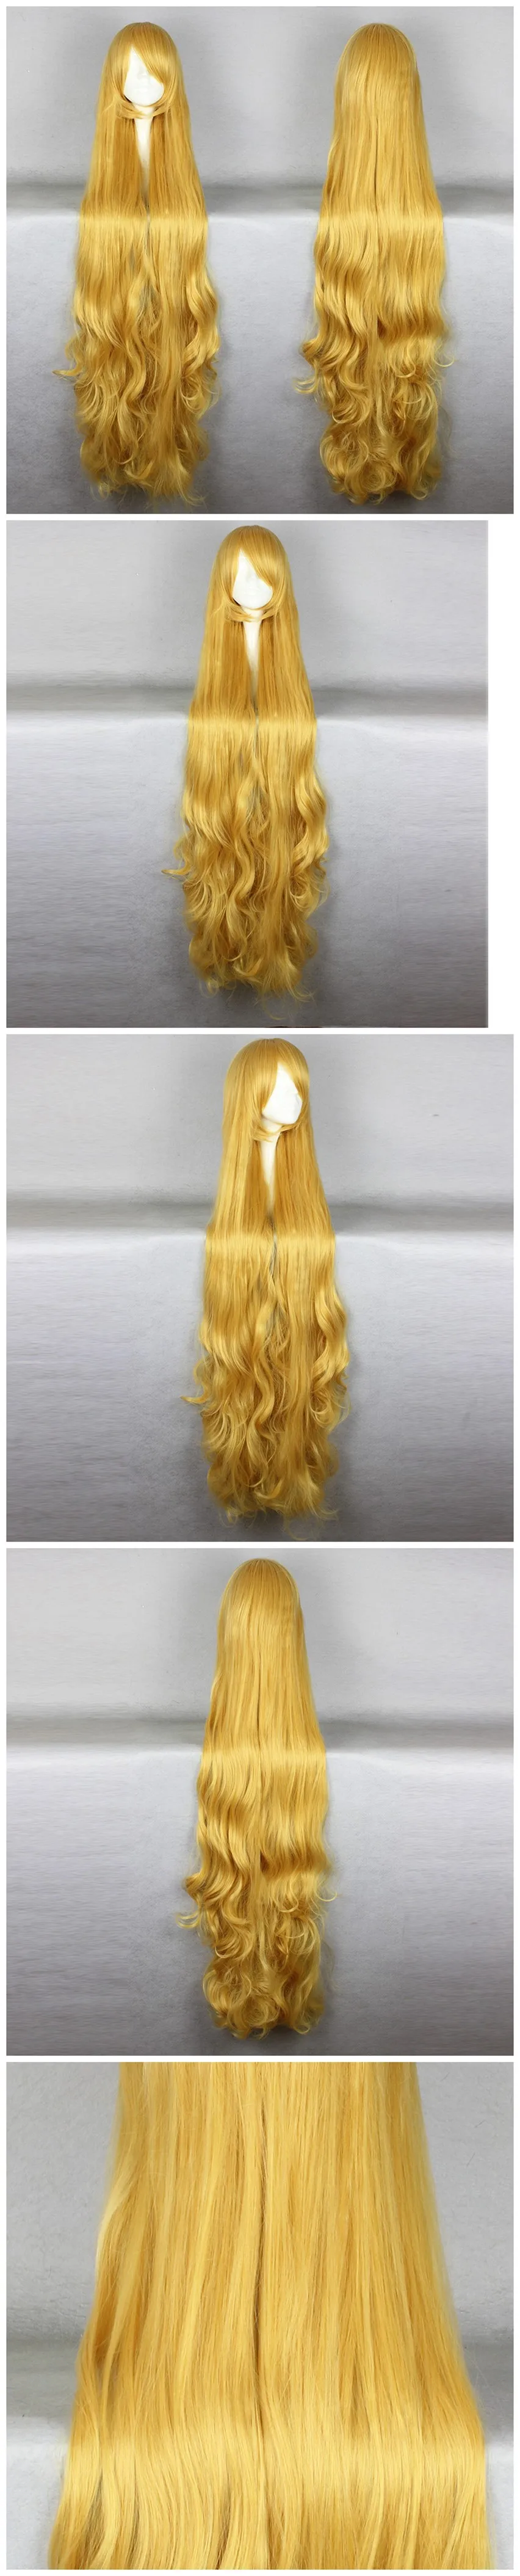 150 CM Mixed gold yellow long straight hair wig fashion costume cosplay wig G37 